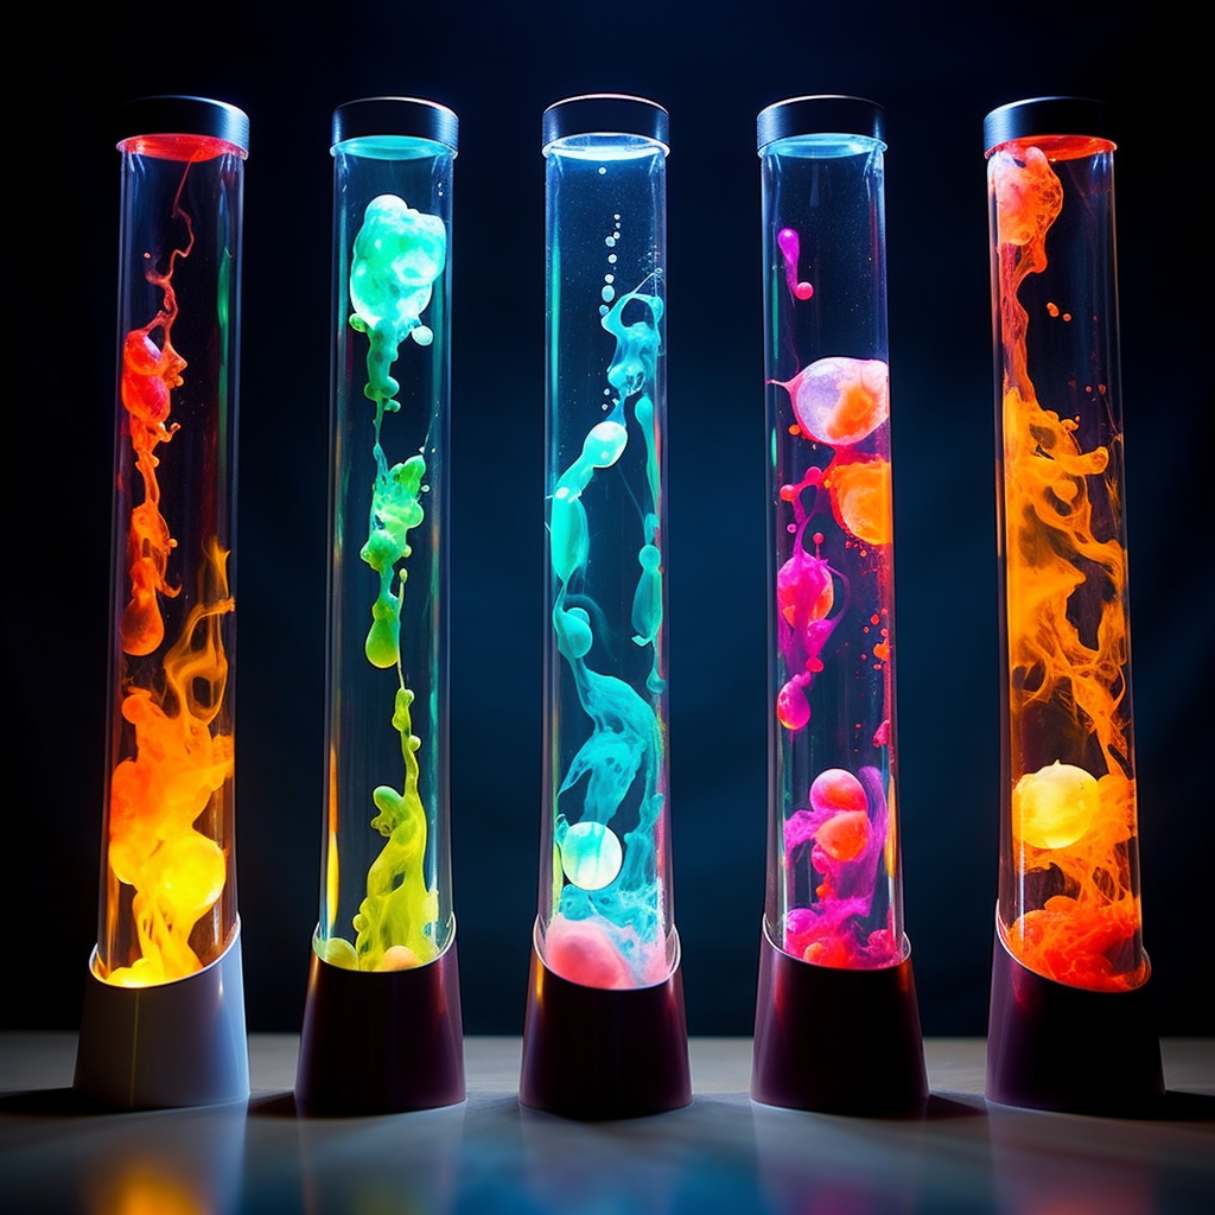 What Provides The Thermal Energy In The Lava Lamp?